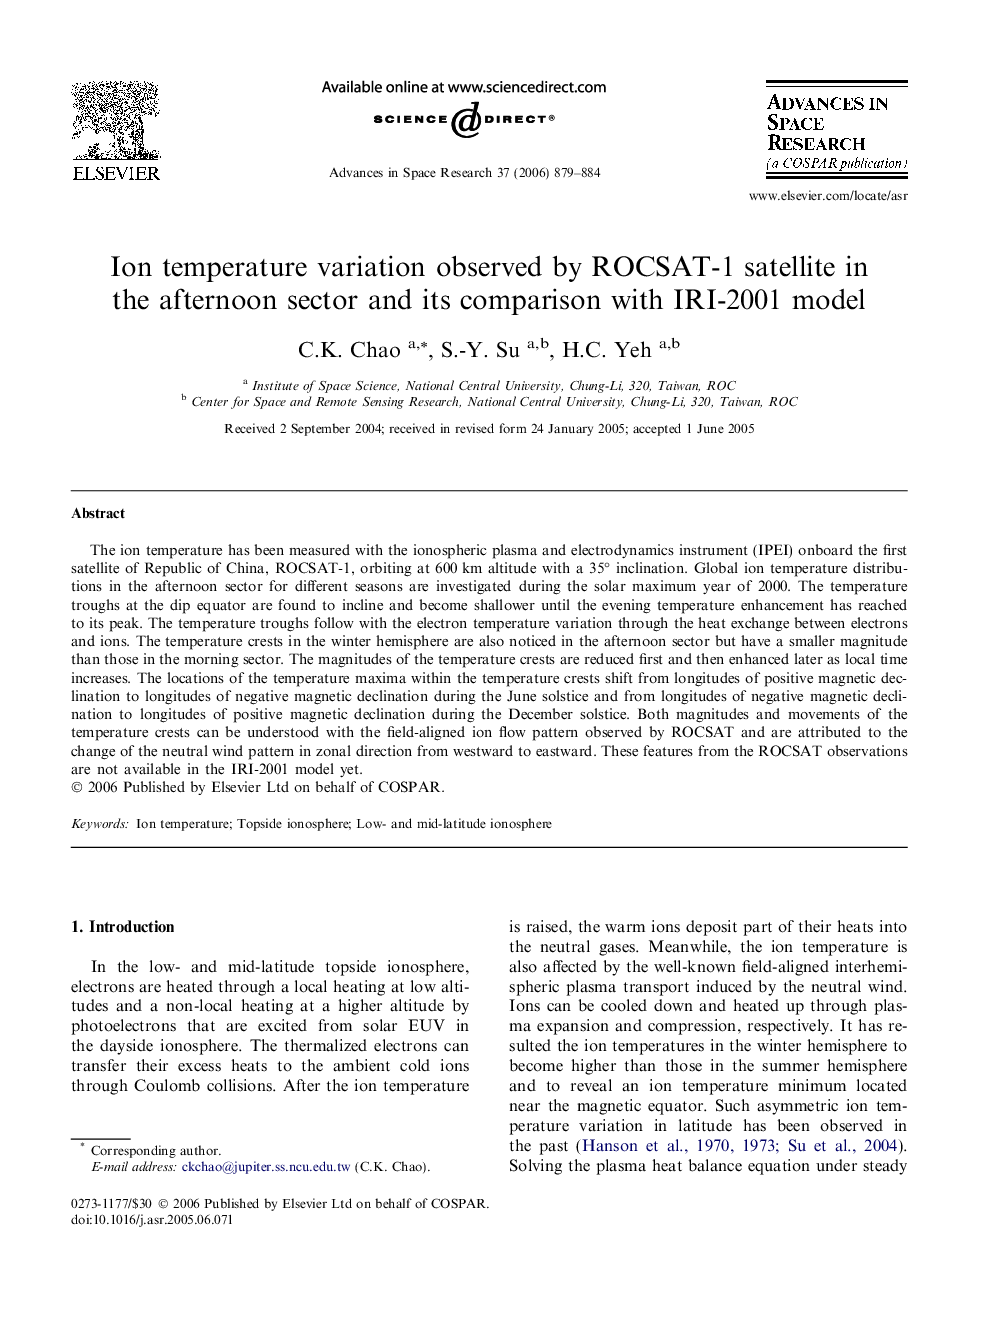 Ion temperature variation observed by ROCSAT-1 satellite in the afternoon sector and its comparison with IRI-2001 model